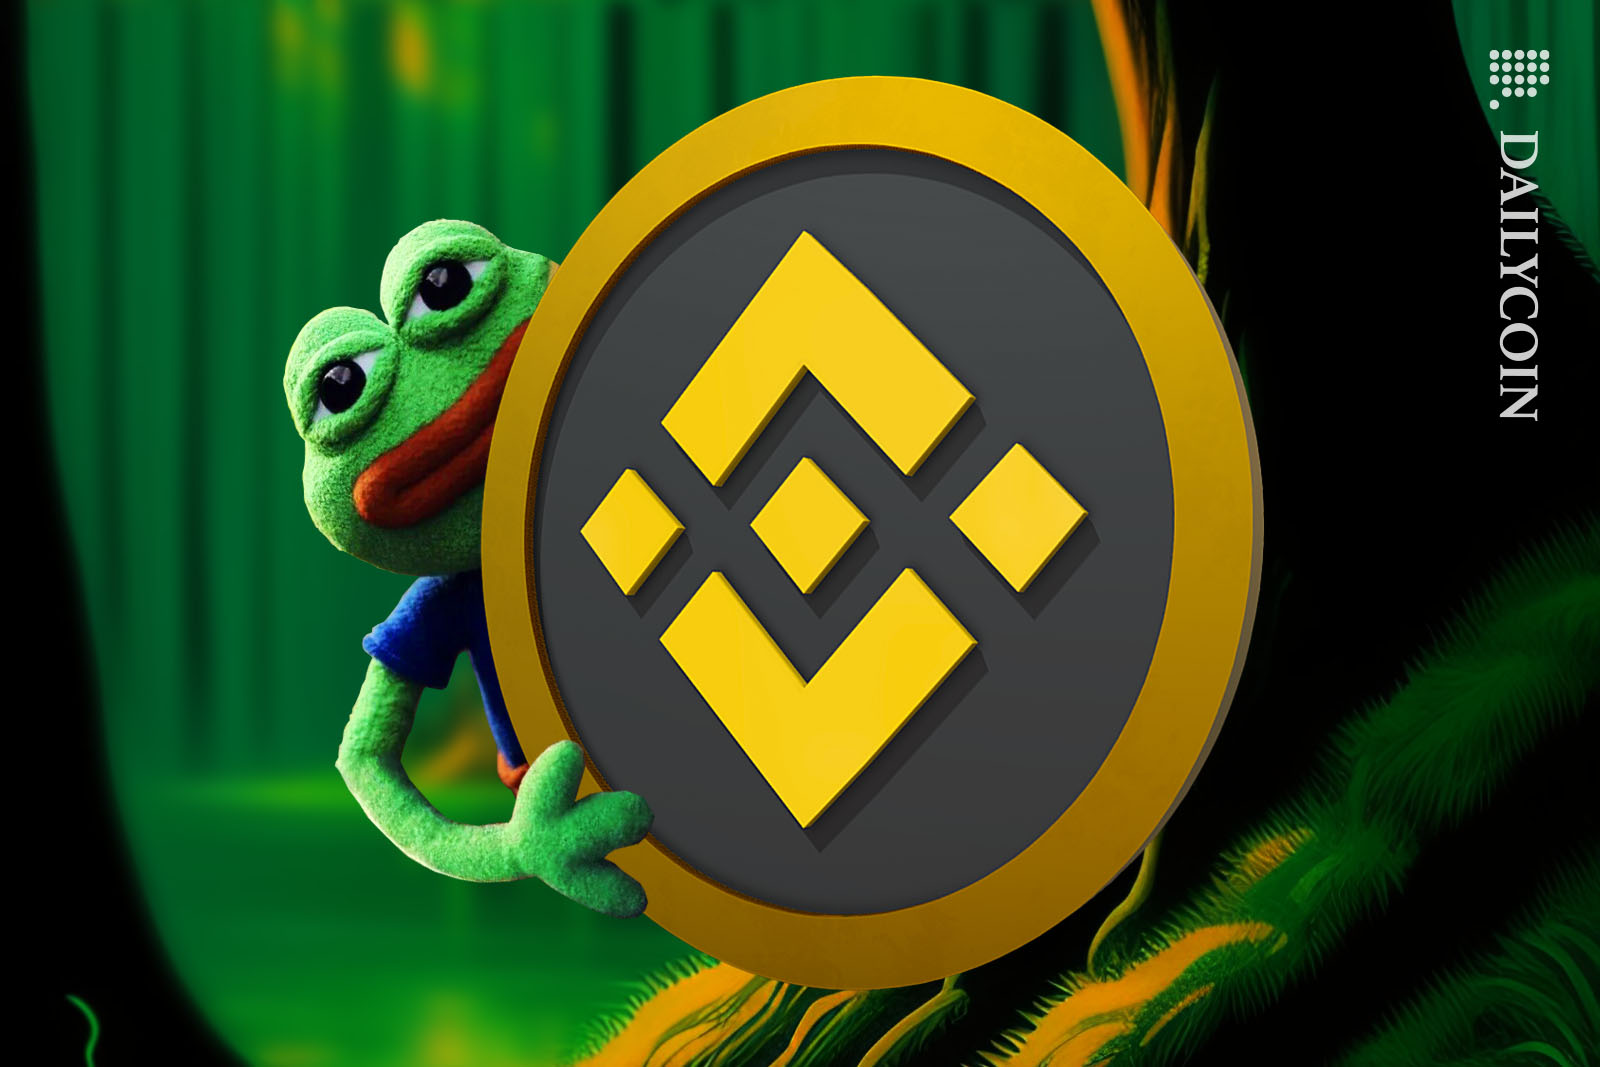 Pepe the frog peeking out from behind a Binance logo in a swamp.